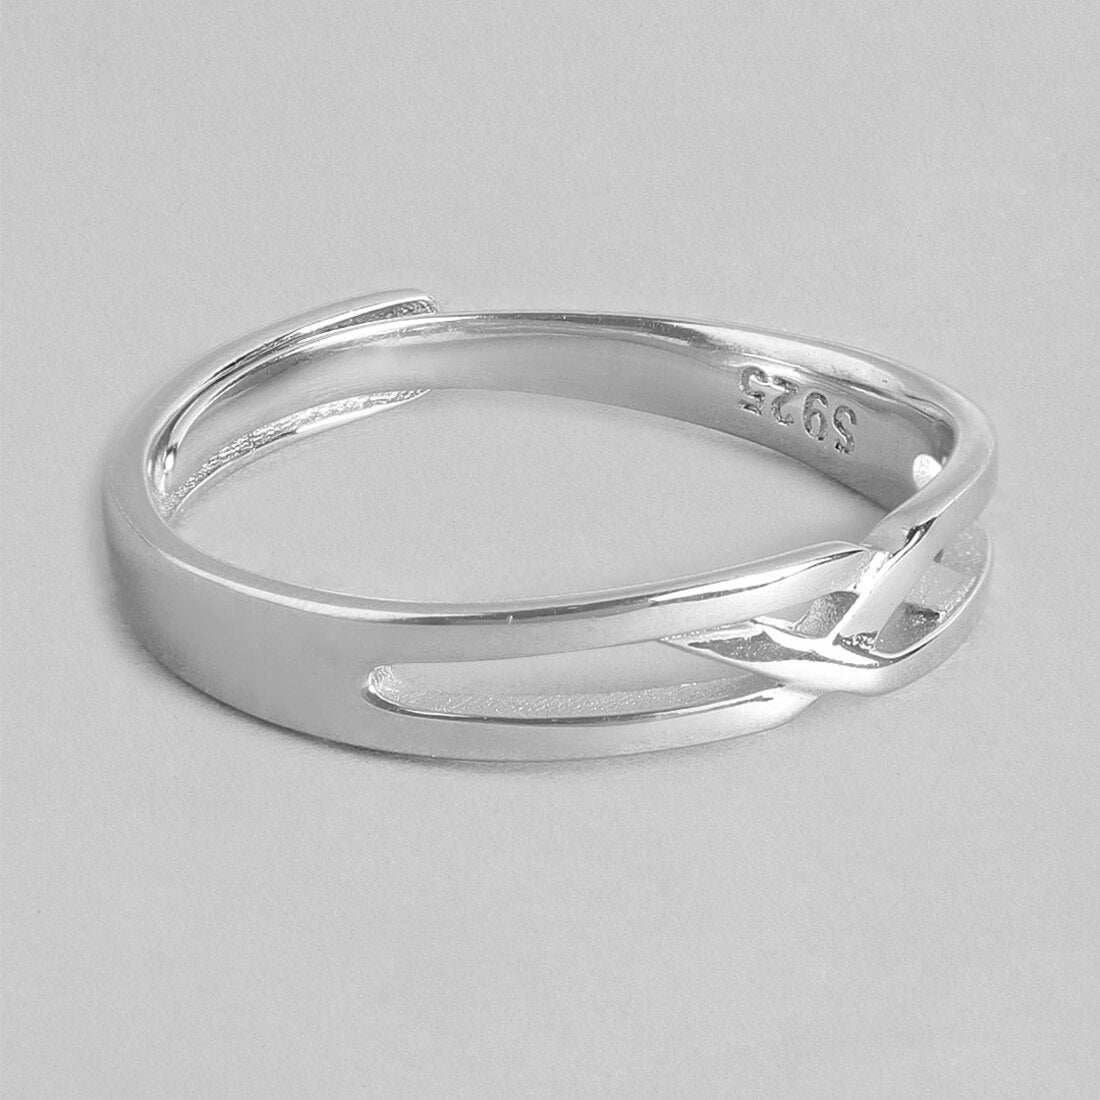 Eternal Strength Rhodium-Plated 925 Sterling Silver Weave Ring for Him